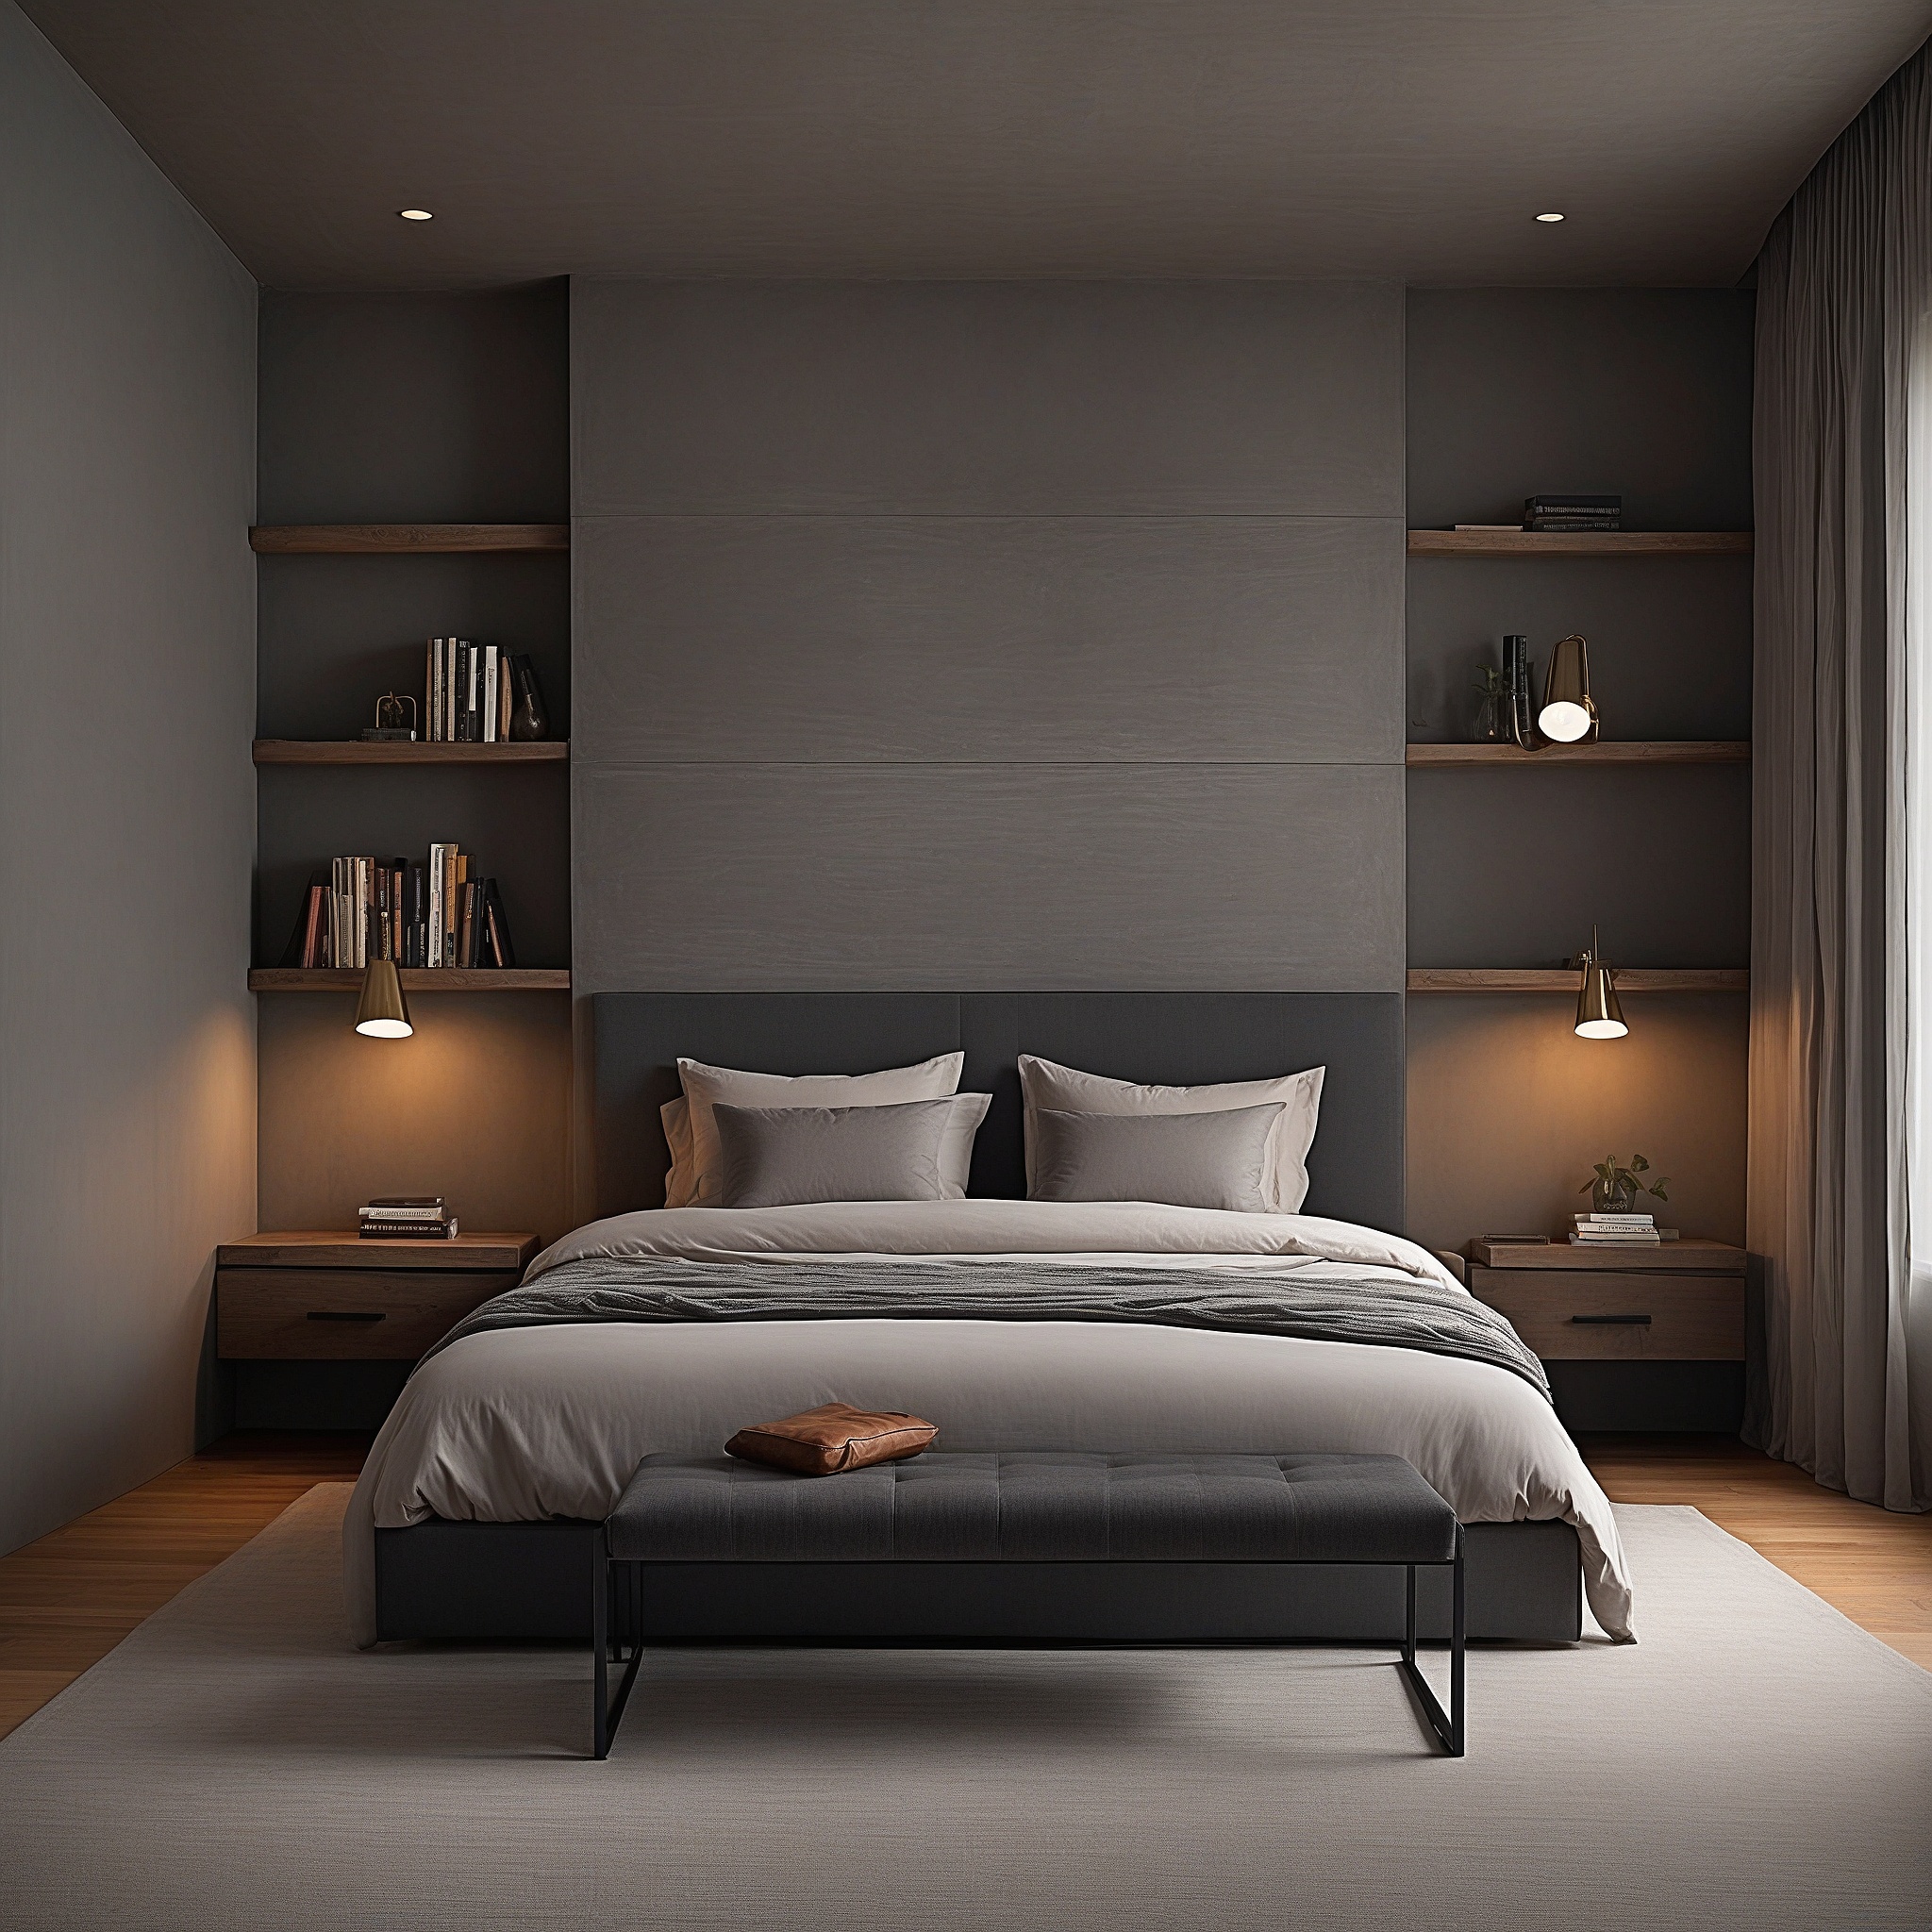 Modern Urban Bedroom, Concrete Walls, Shelving, King Sized Bed With Leather Headboard